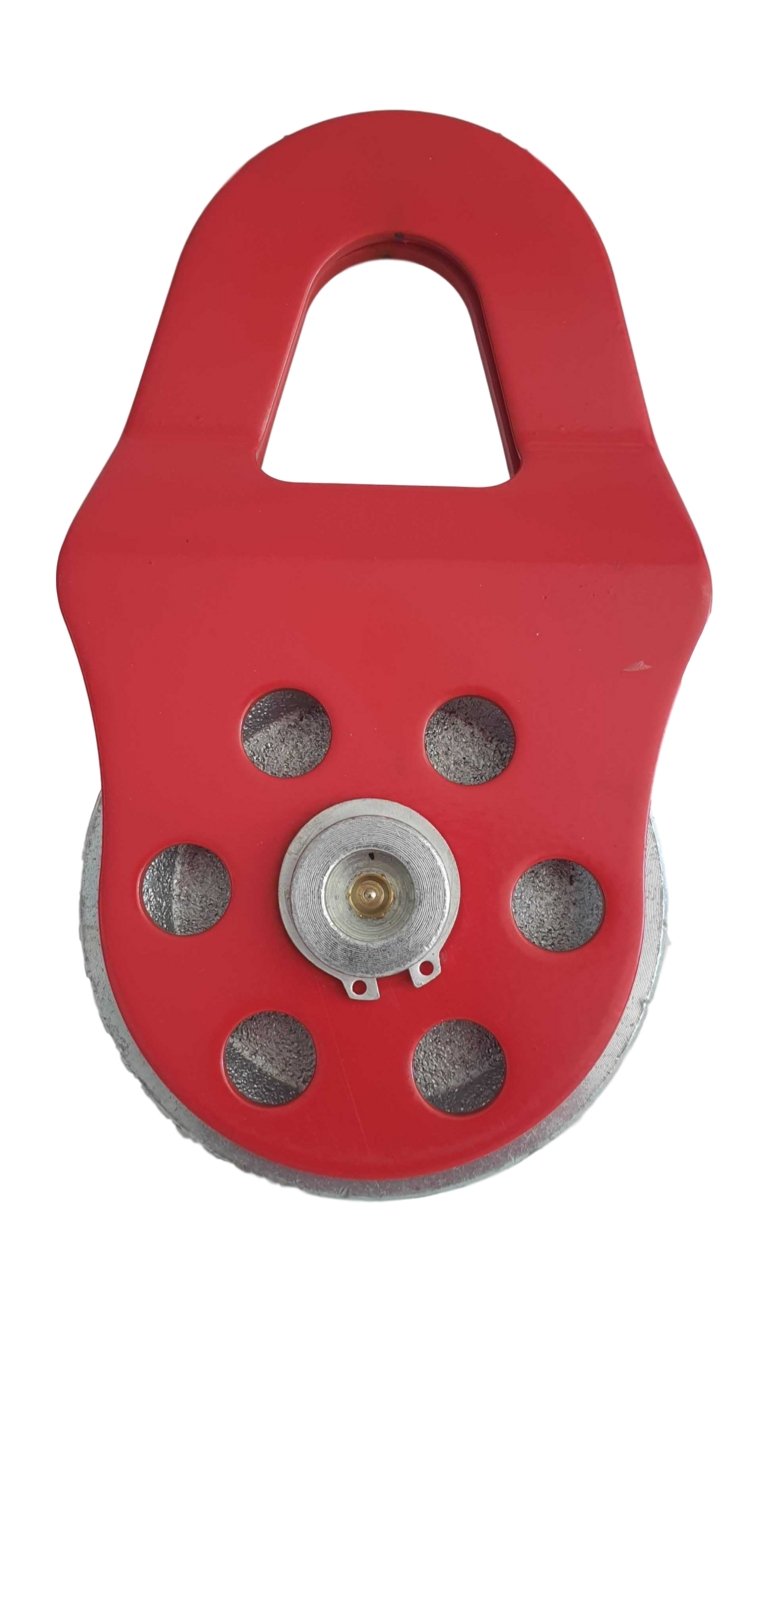 Carbon Offroad 8 Tonne Snatch block pulley V2 - cw-10tsn 1